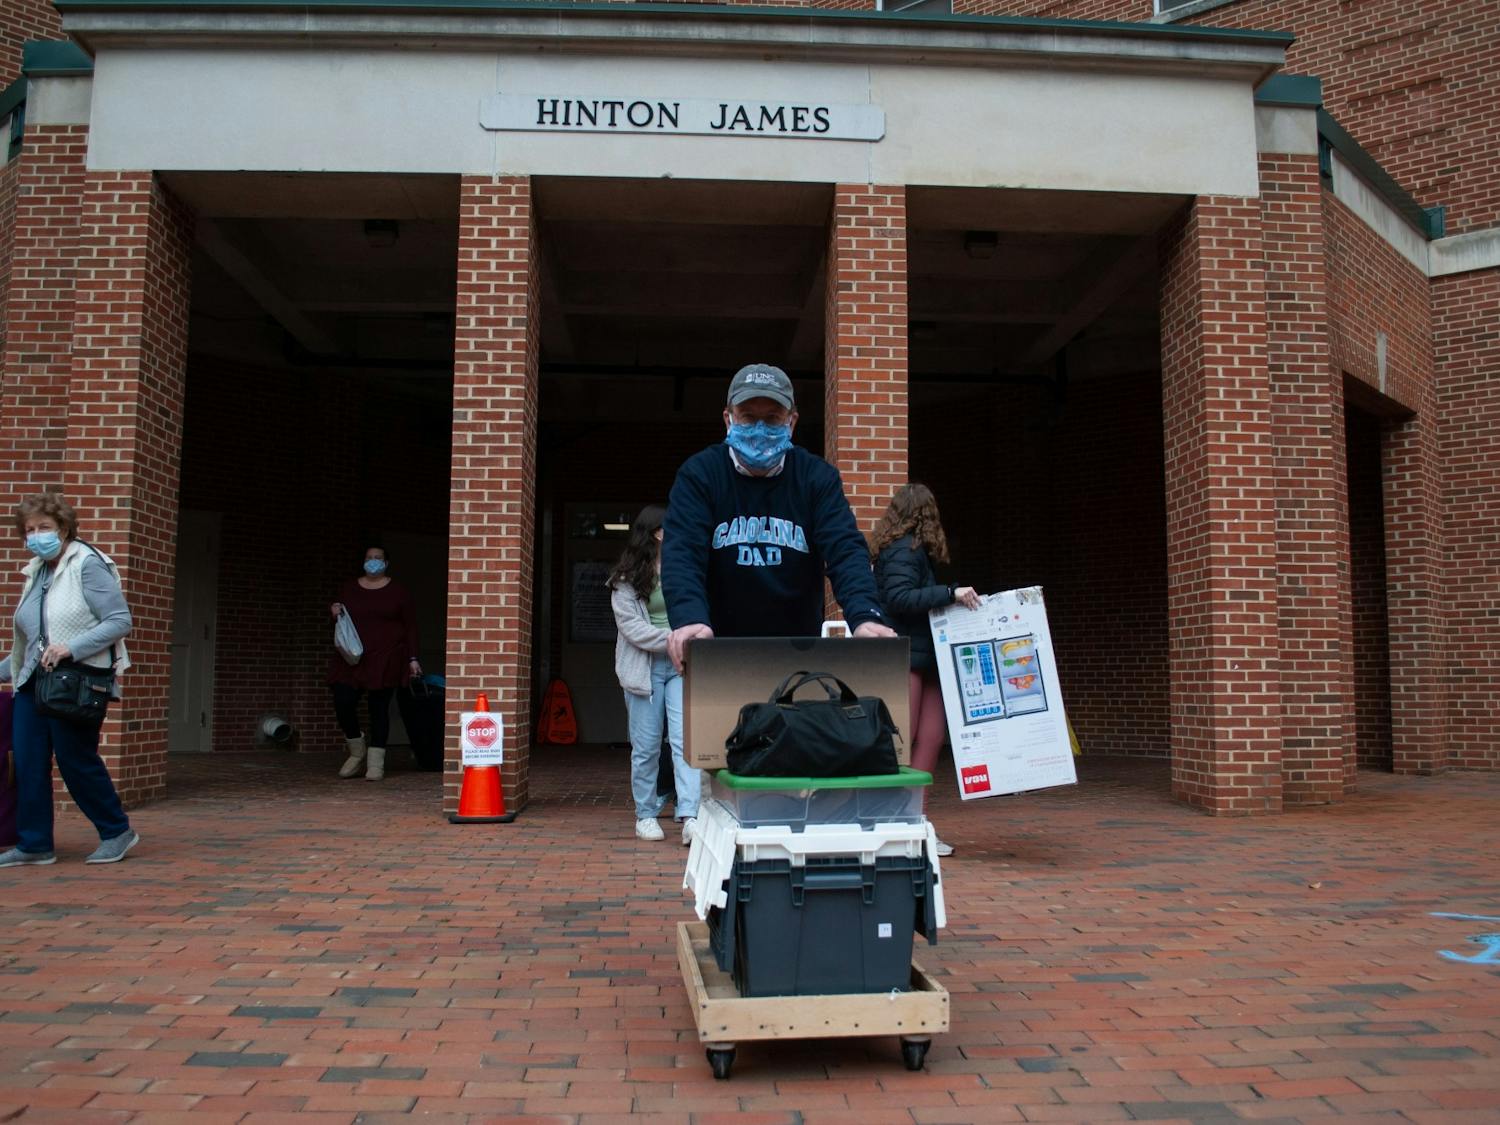 First-year students return to on-campus housing at Hinton James Residence Hall for UNC's spring semester on Saturday, Jan. 16, 2021.